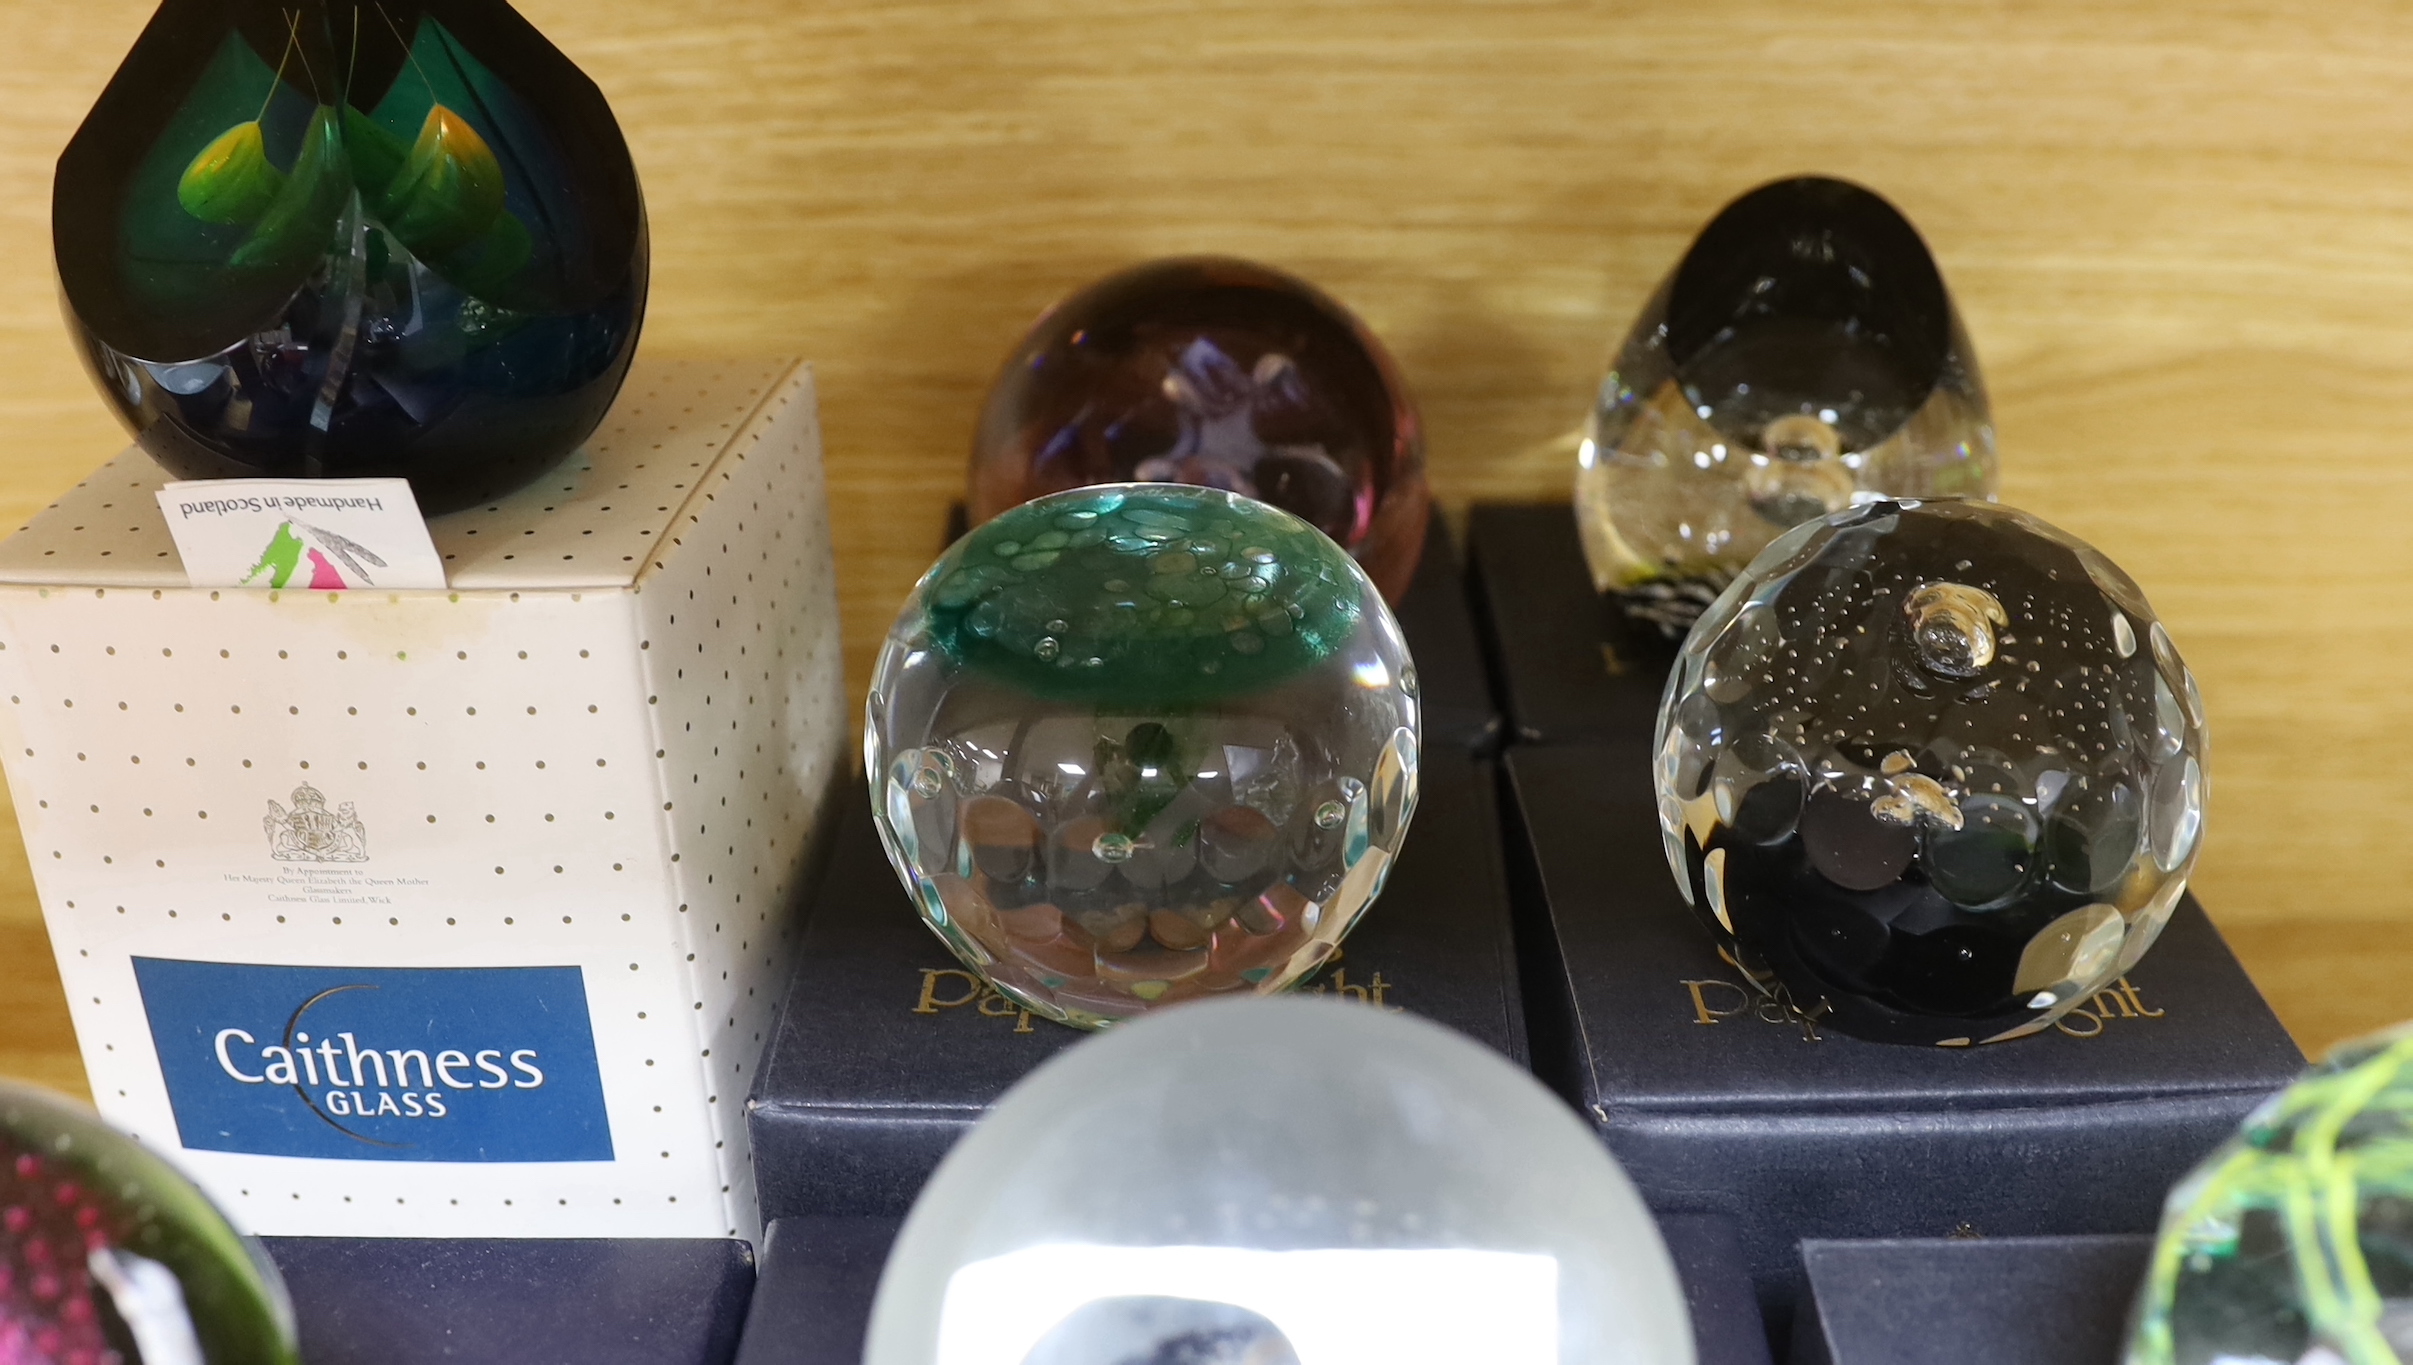 Nine Caithness paperweights including Arctic Night, limited edition 780/1500 and Sea nymphs, 114/350, each with boxes, the largest 9cm high